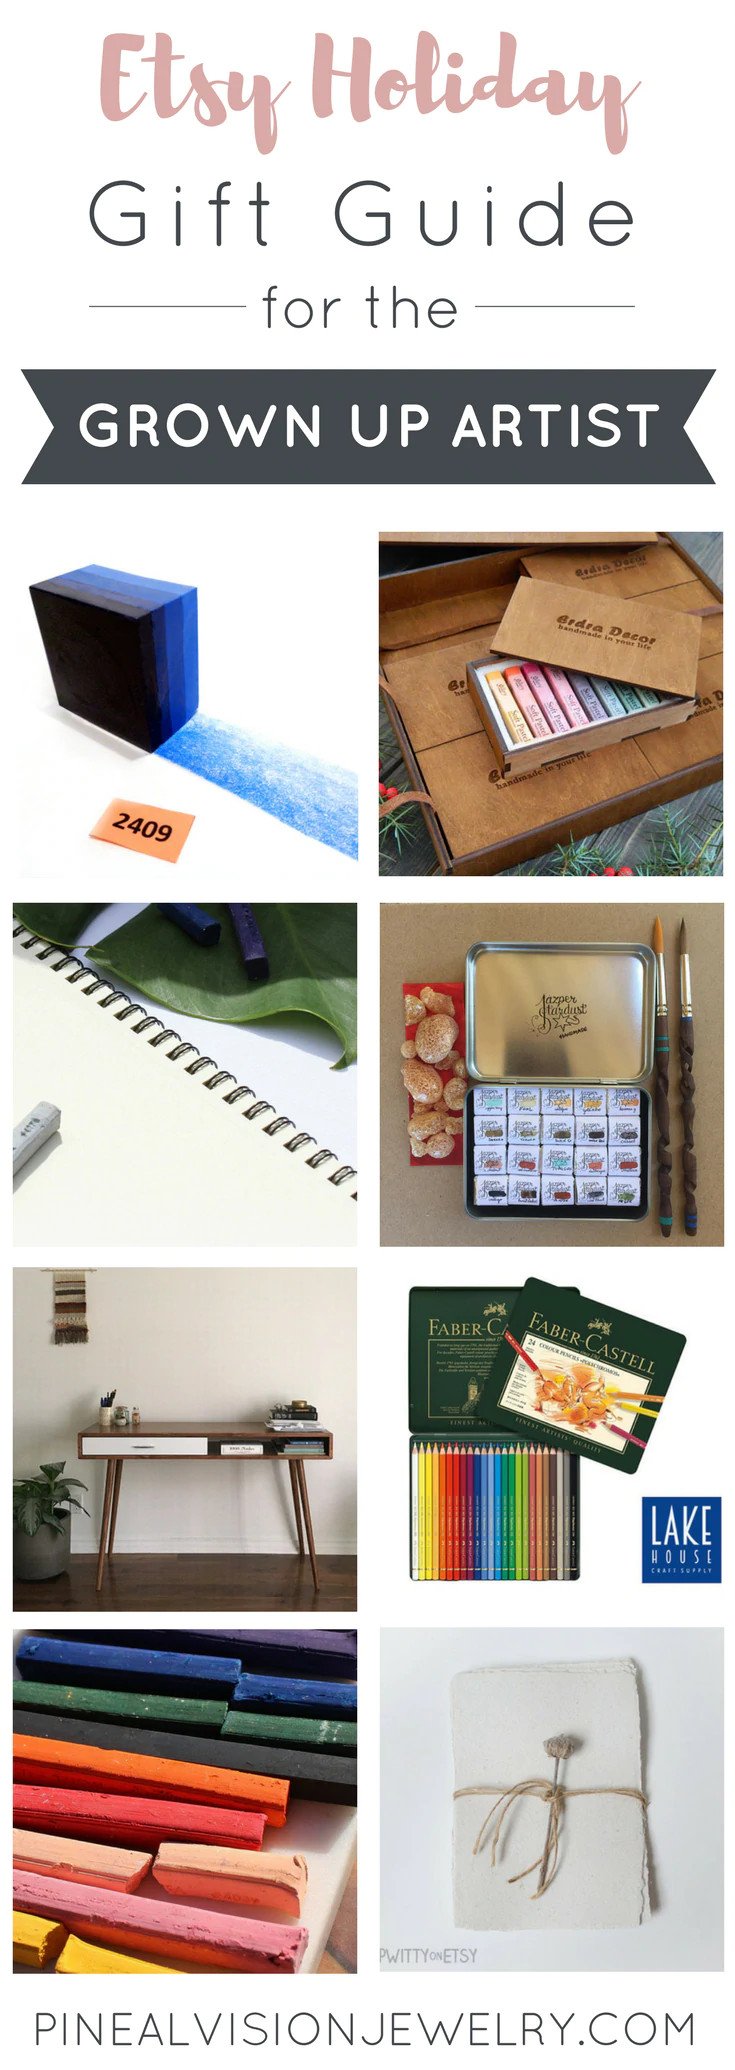 Holiday Gift Guide for Art Journaling